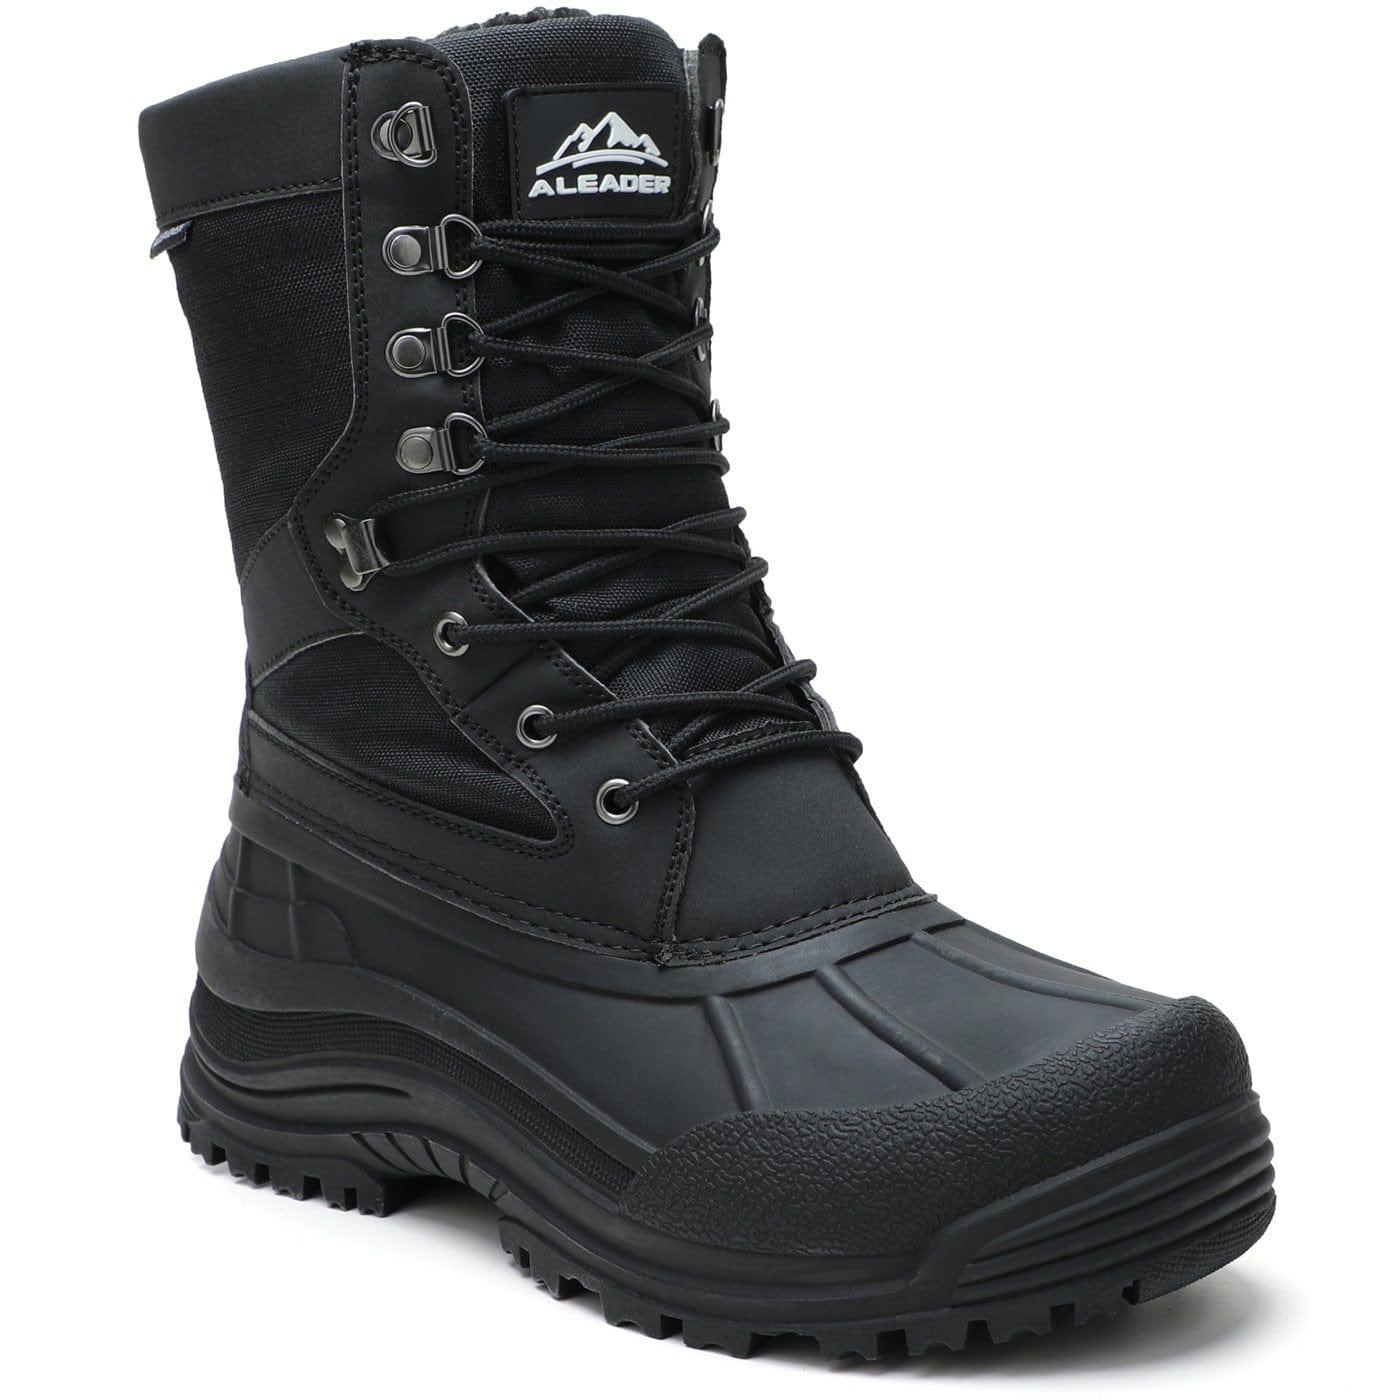 Aleader Aleader Men’s Lace up Insulated Waterproof Winter Snow Boots - Black/Pu